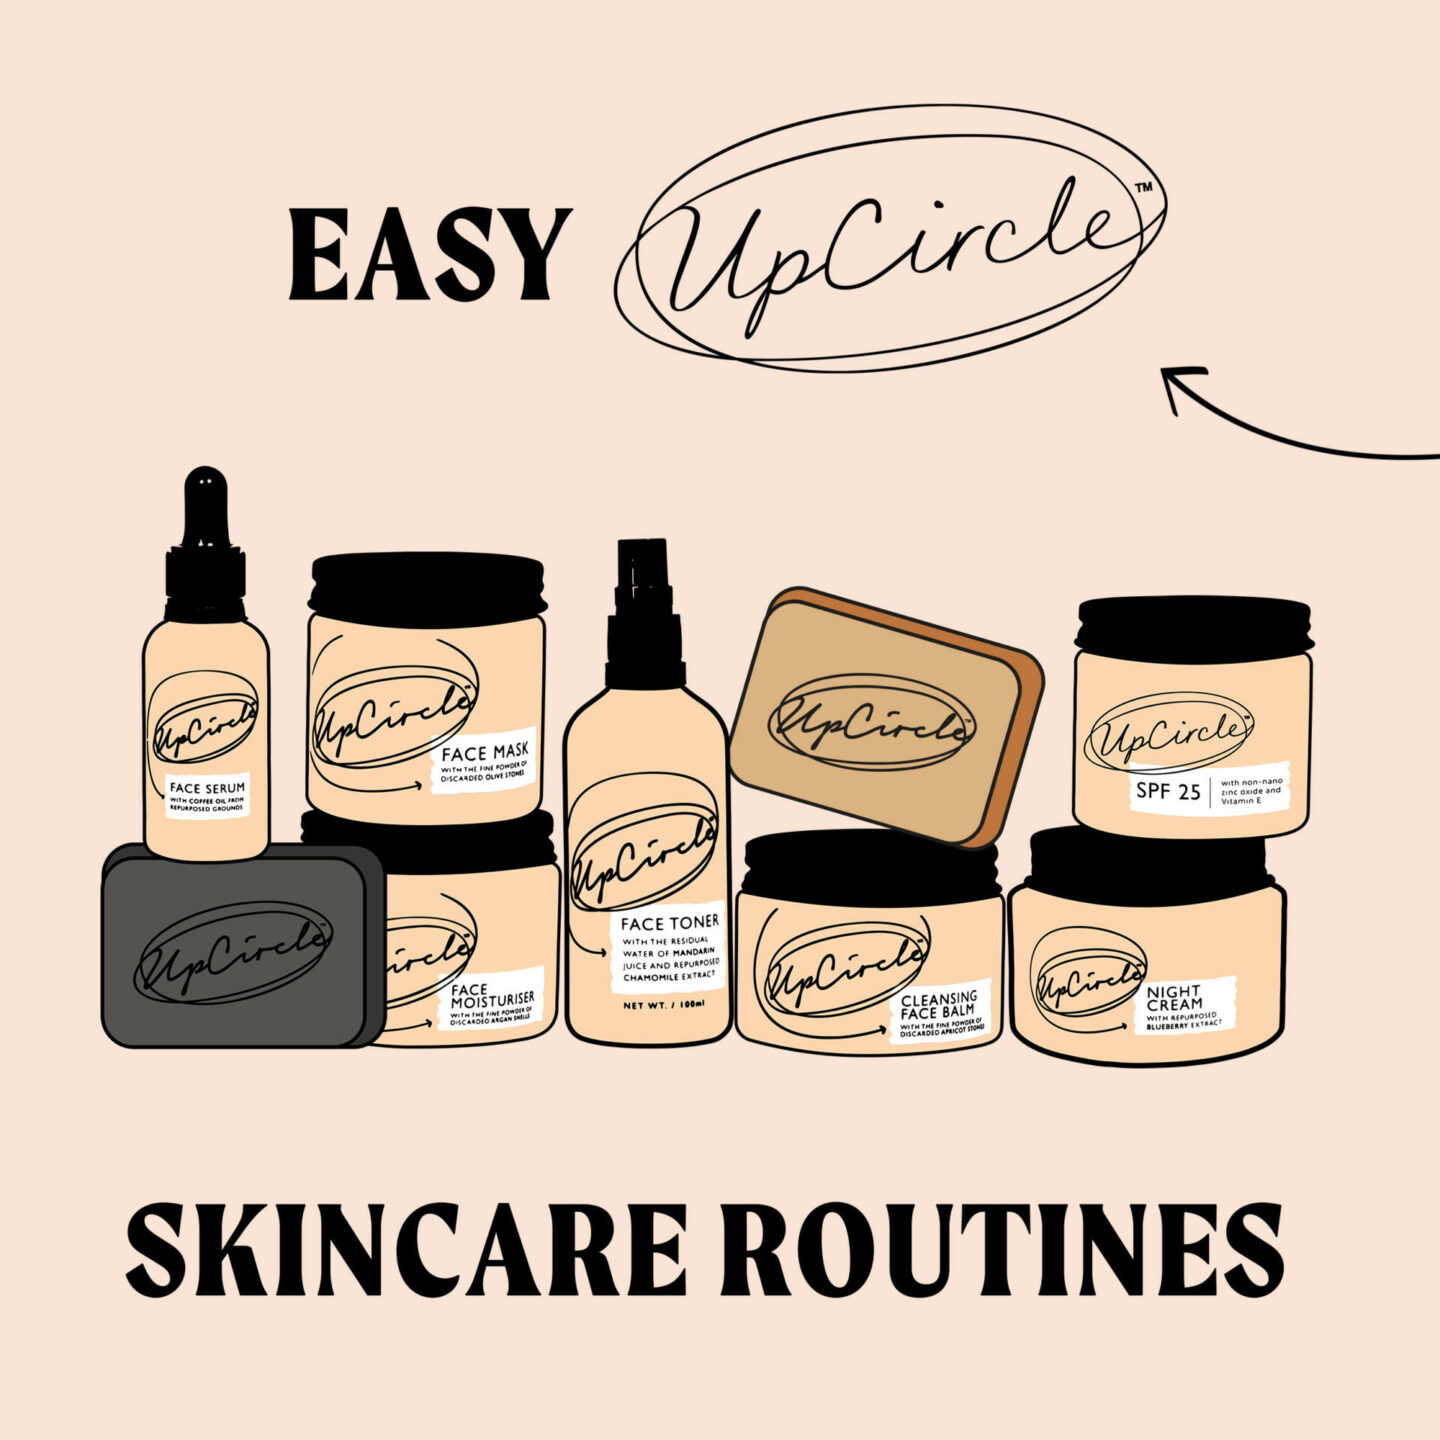 UpCircle Beauty’s Simple 3-Step Skincare Routines